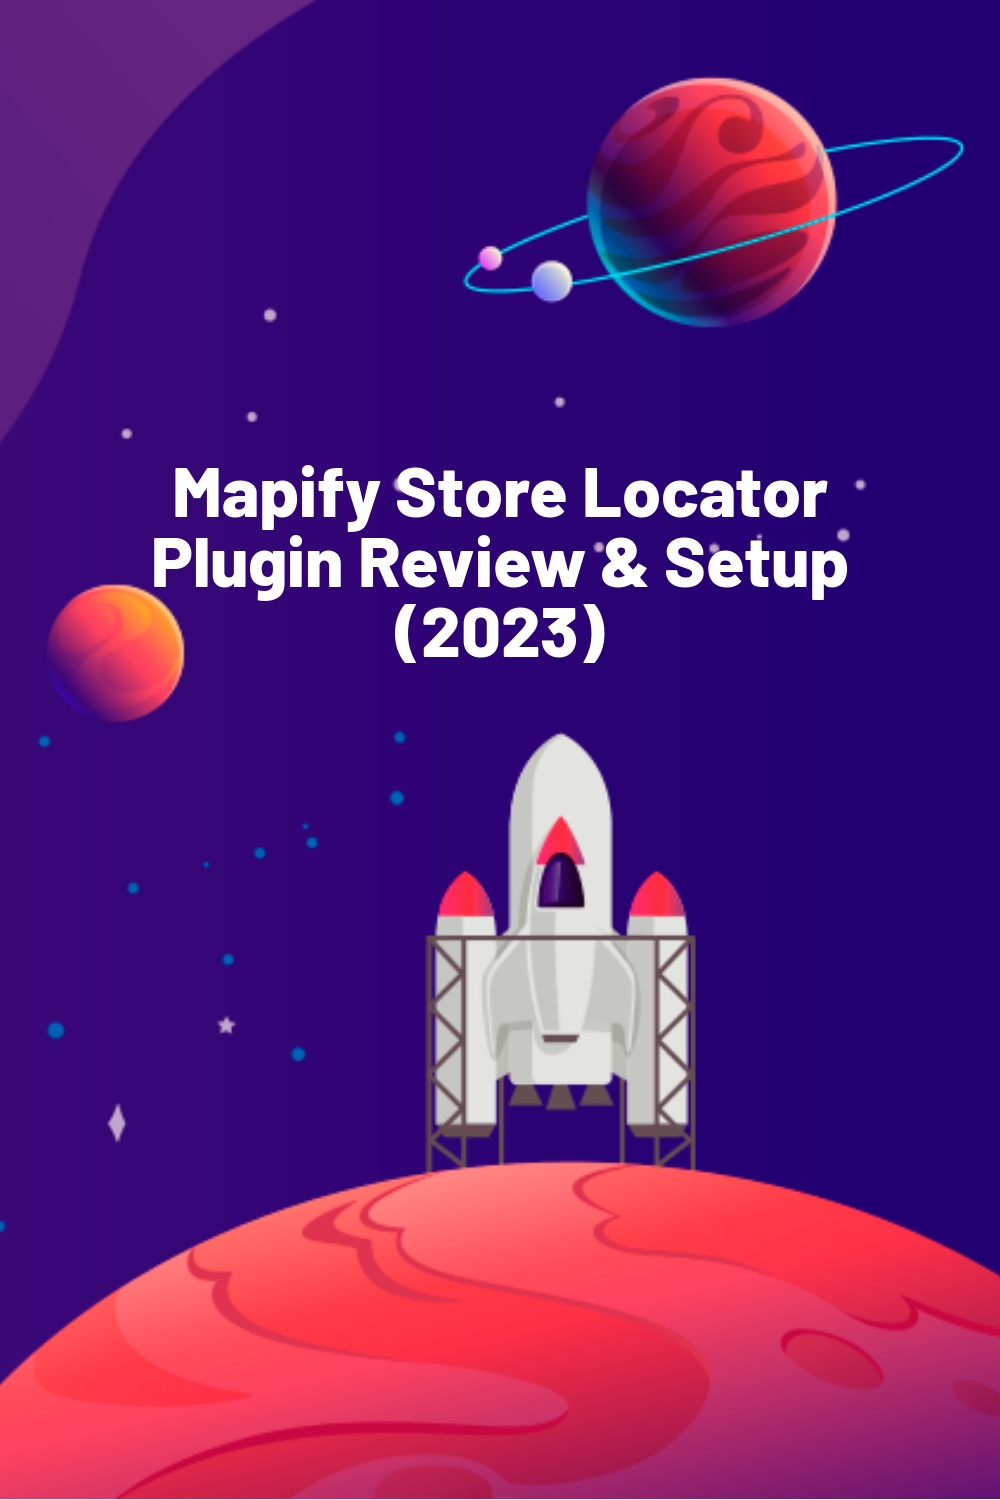 Mapify Store Locator Plugin Review & Setup (2023)